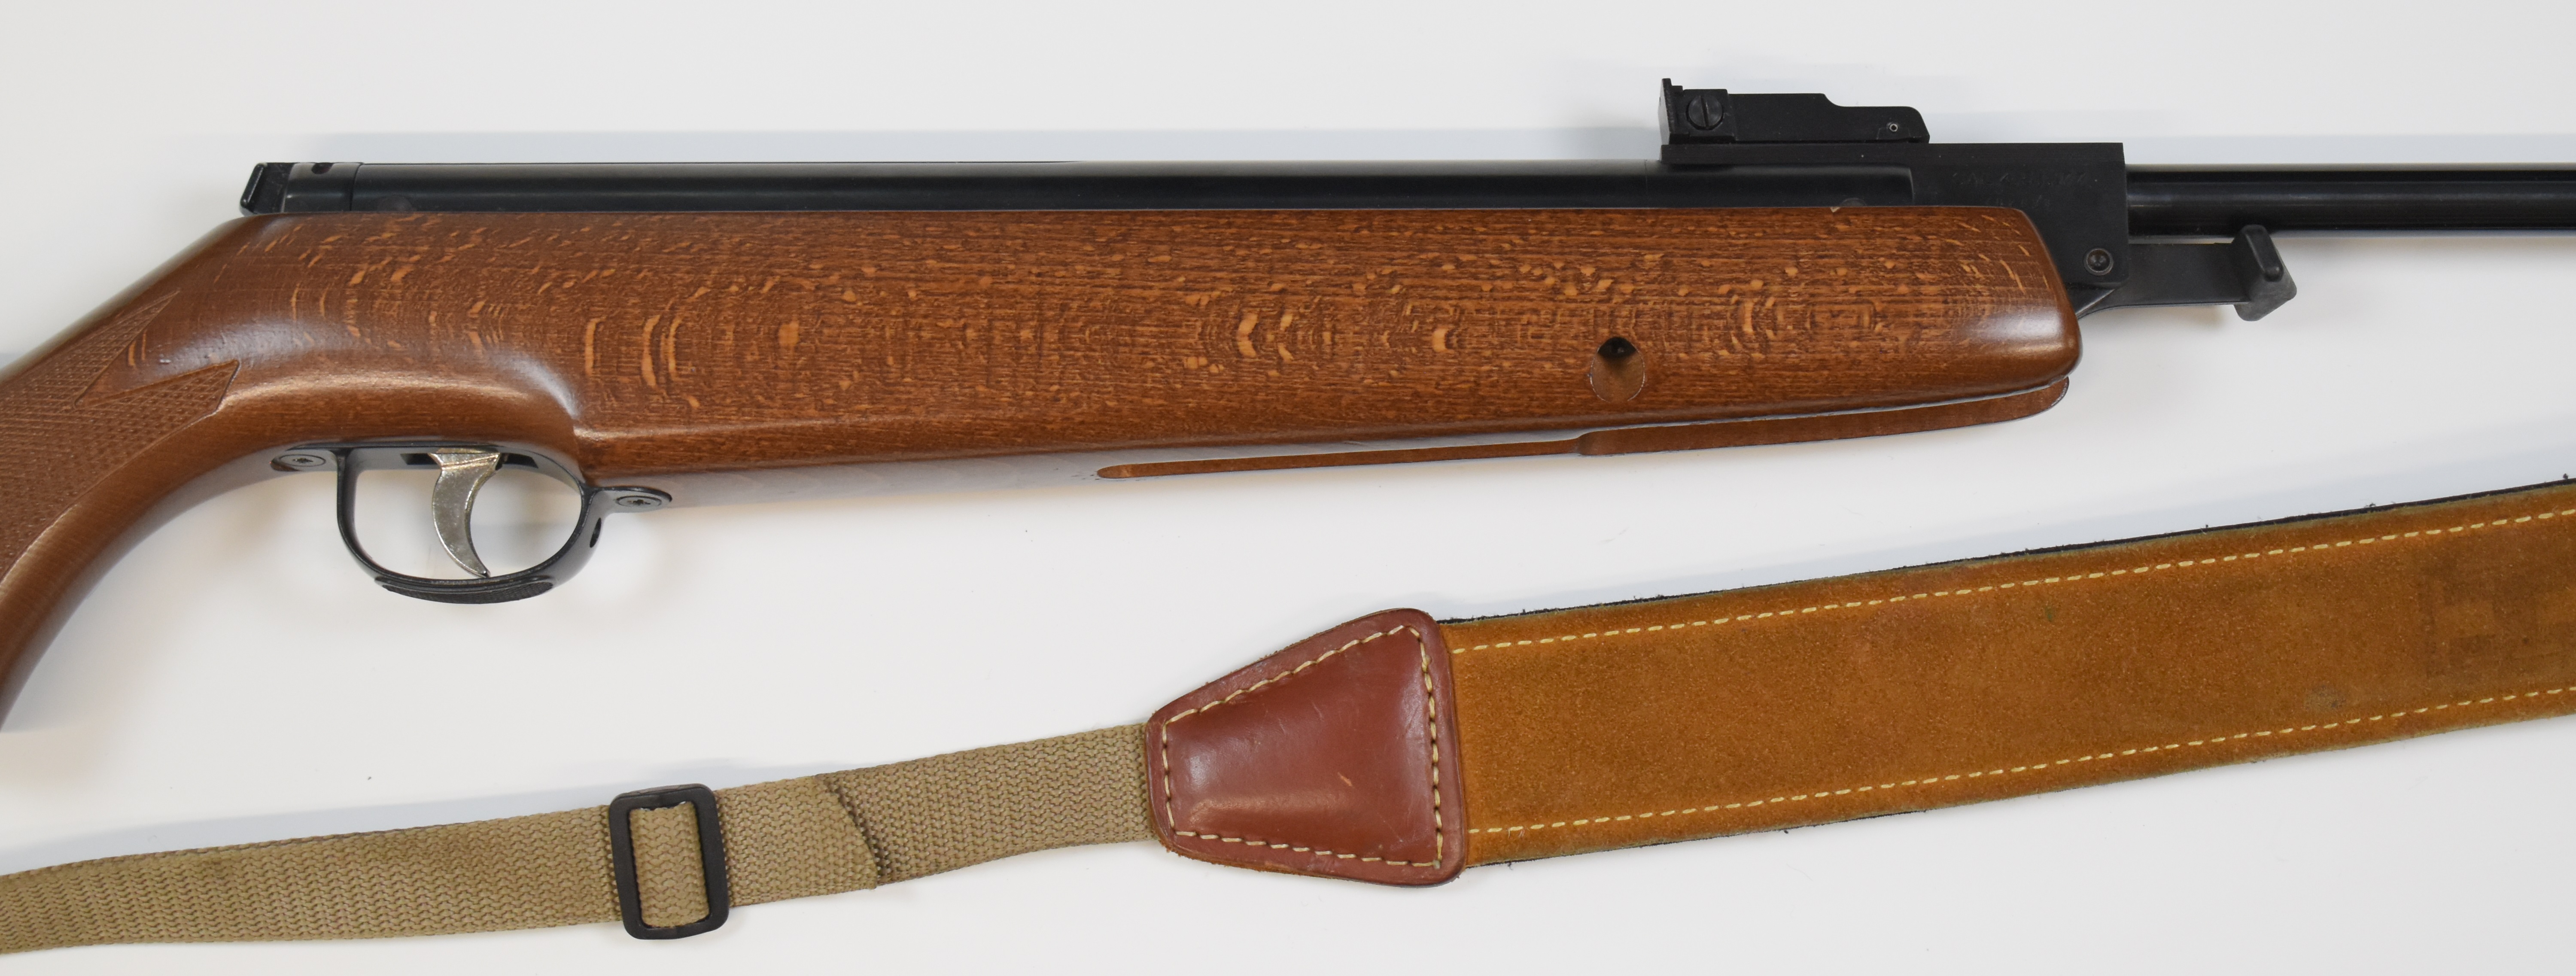 Webley Omega .177 air rifle with chequered semi-pistol grip, raised cheek piece, padded canvas and - Image 4 of 12